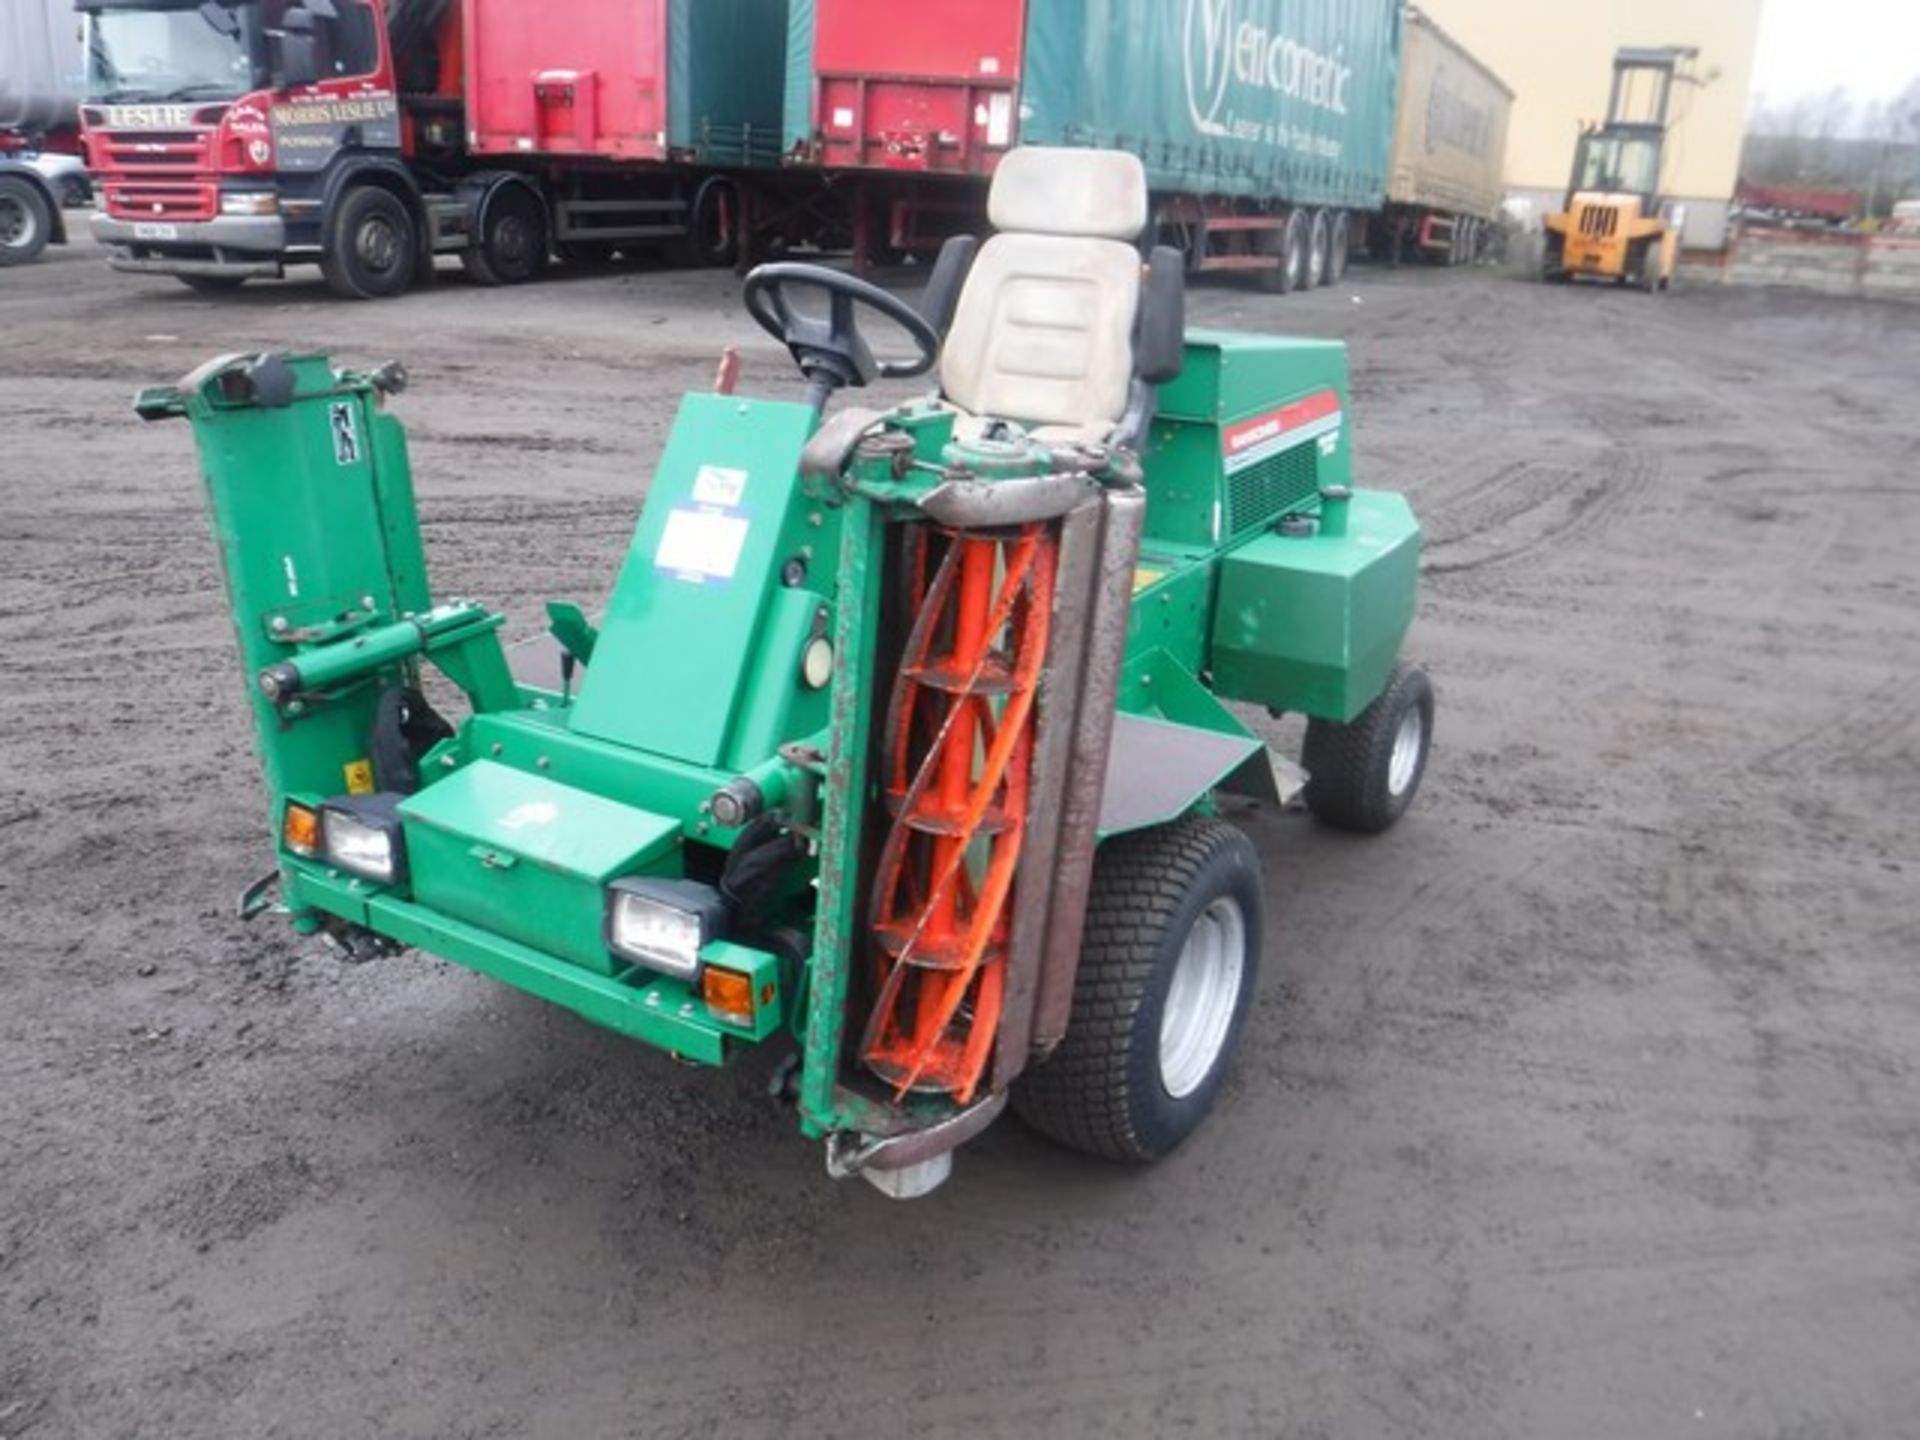 RANSOMES highway mower. 3351hrs.S/N WJ000723. Reg No. SN03 OSX - Image 5 of 7